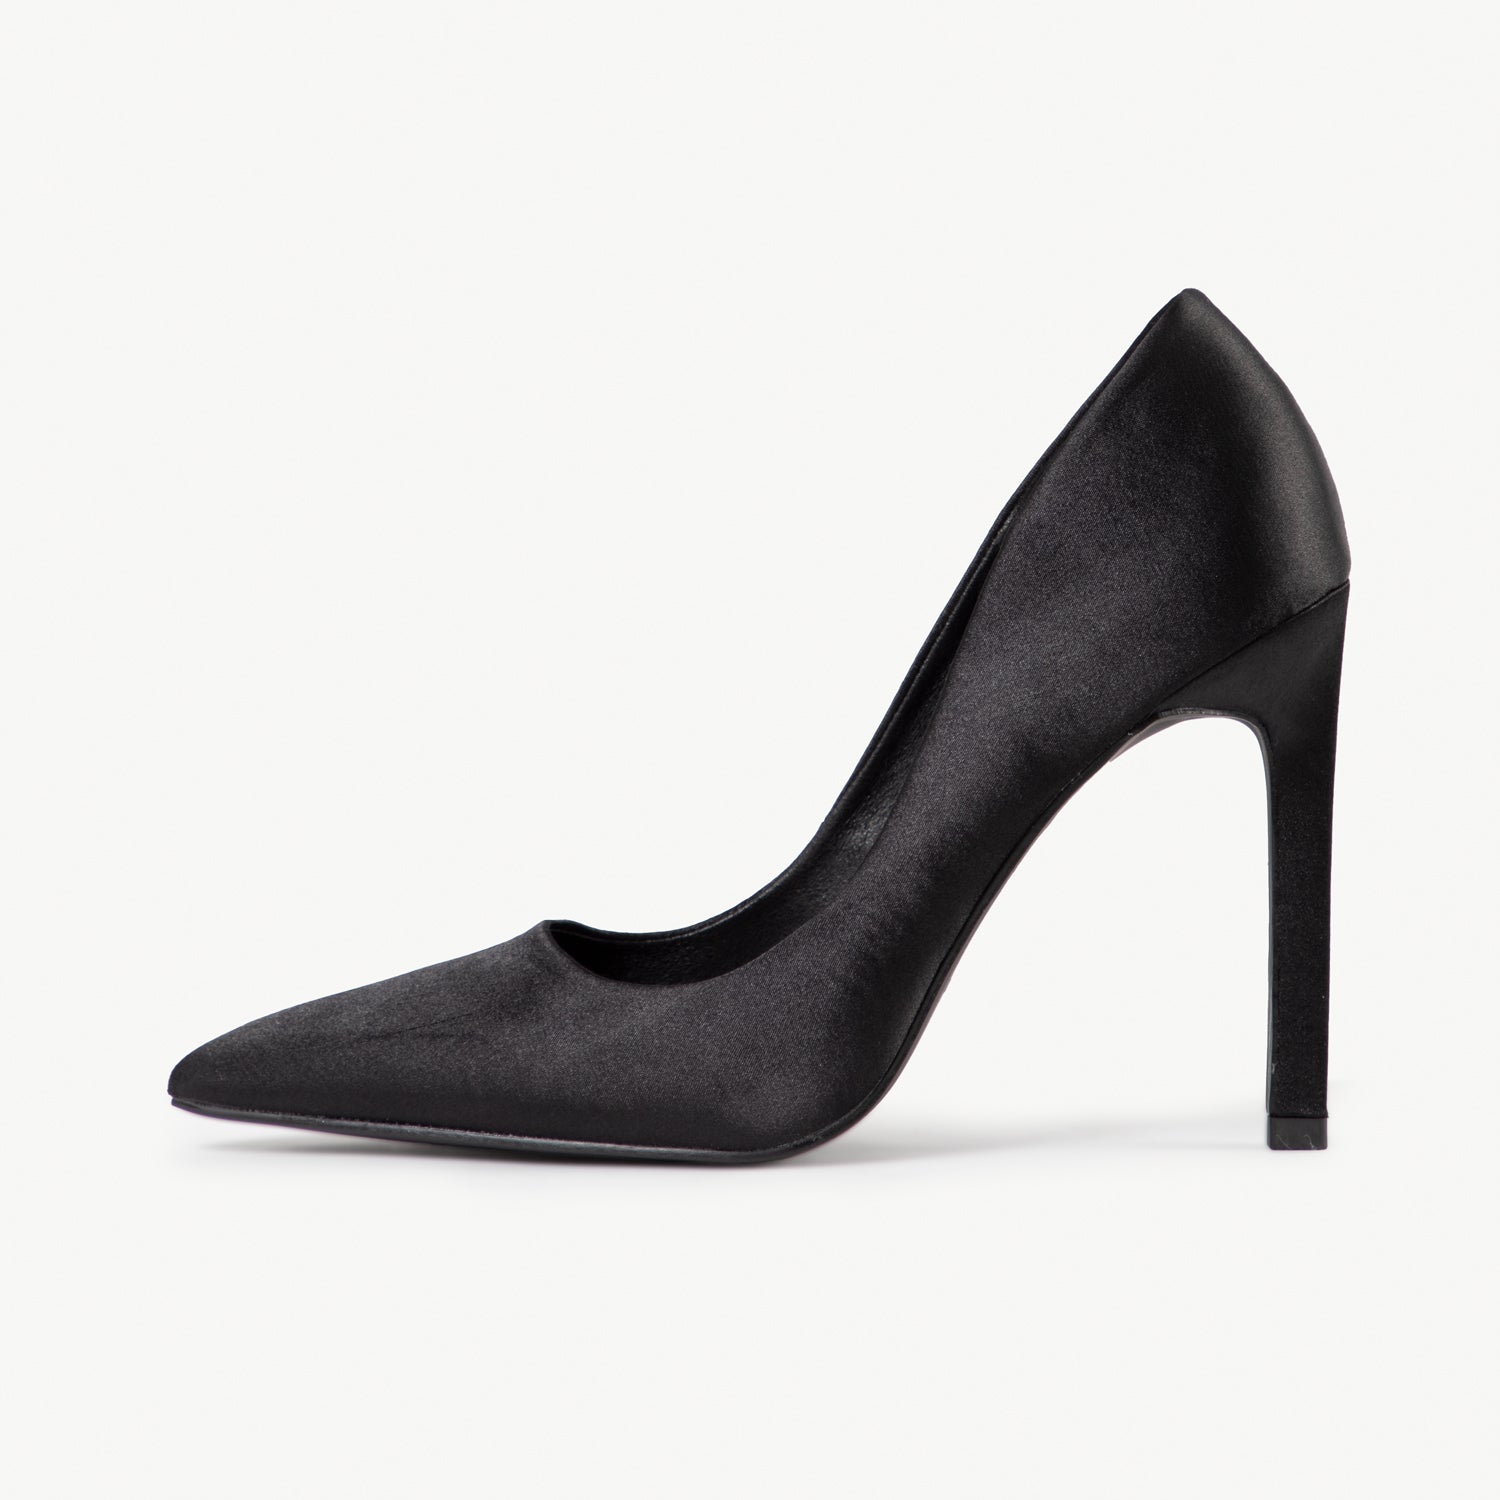 Black Suedette Pointed Stiletto Heel Court Shoes | New Look